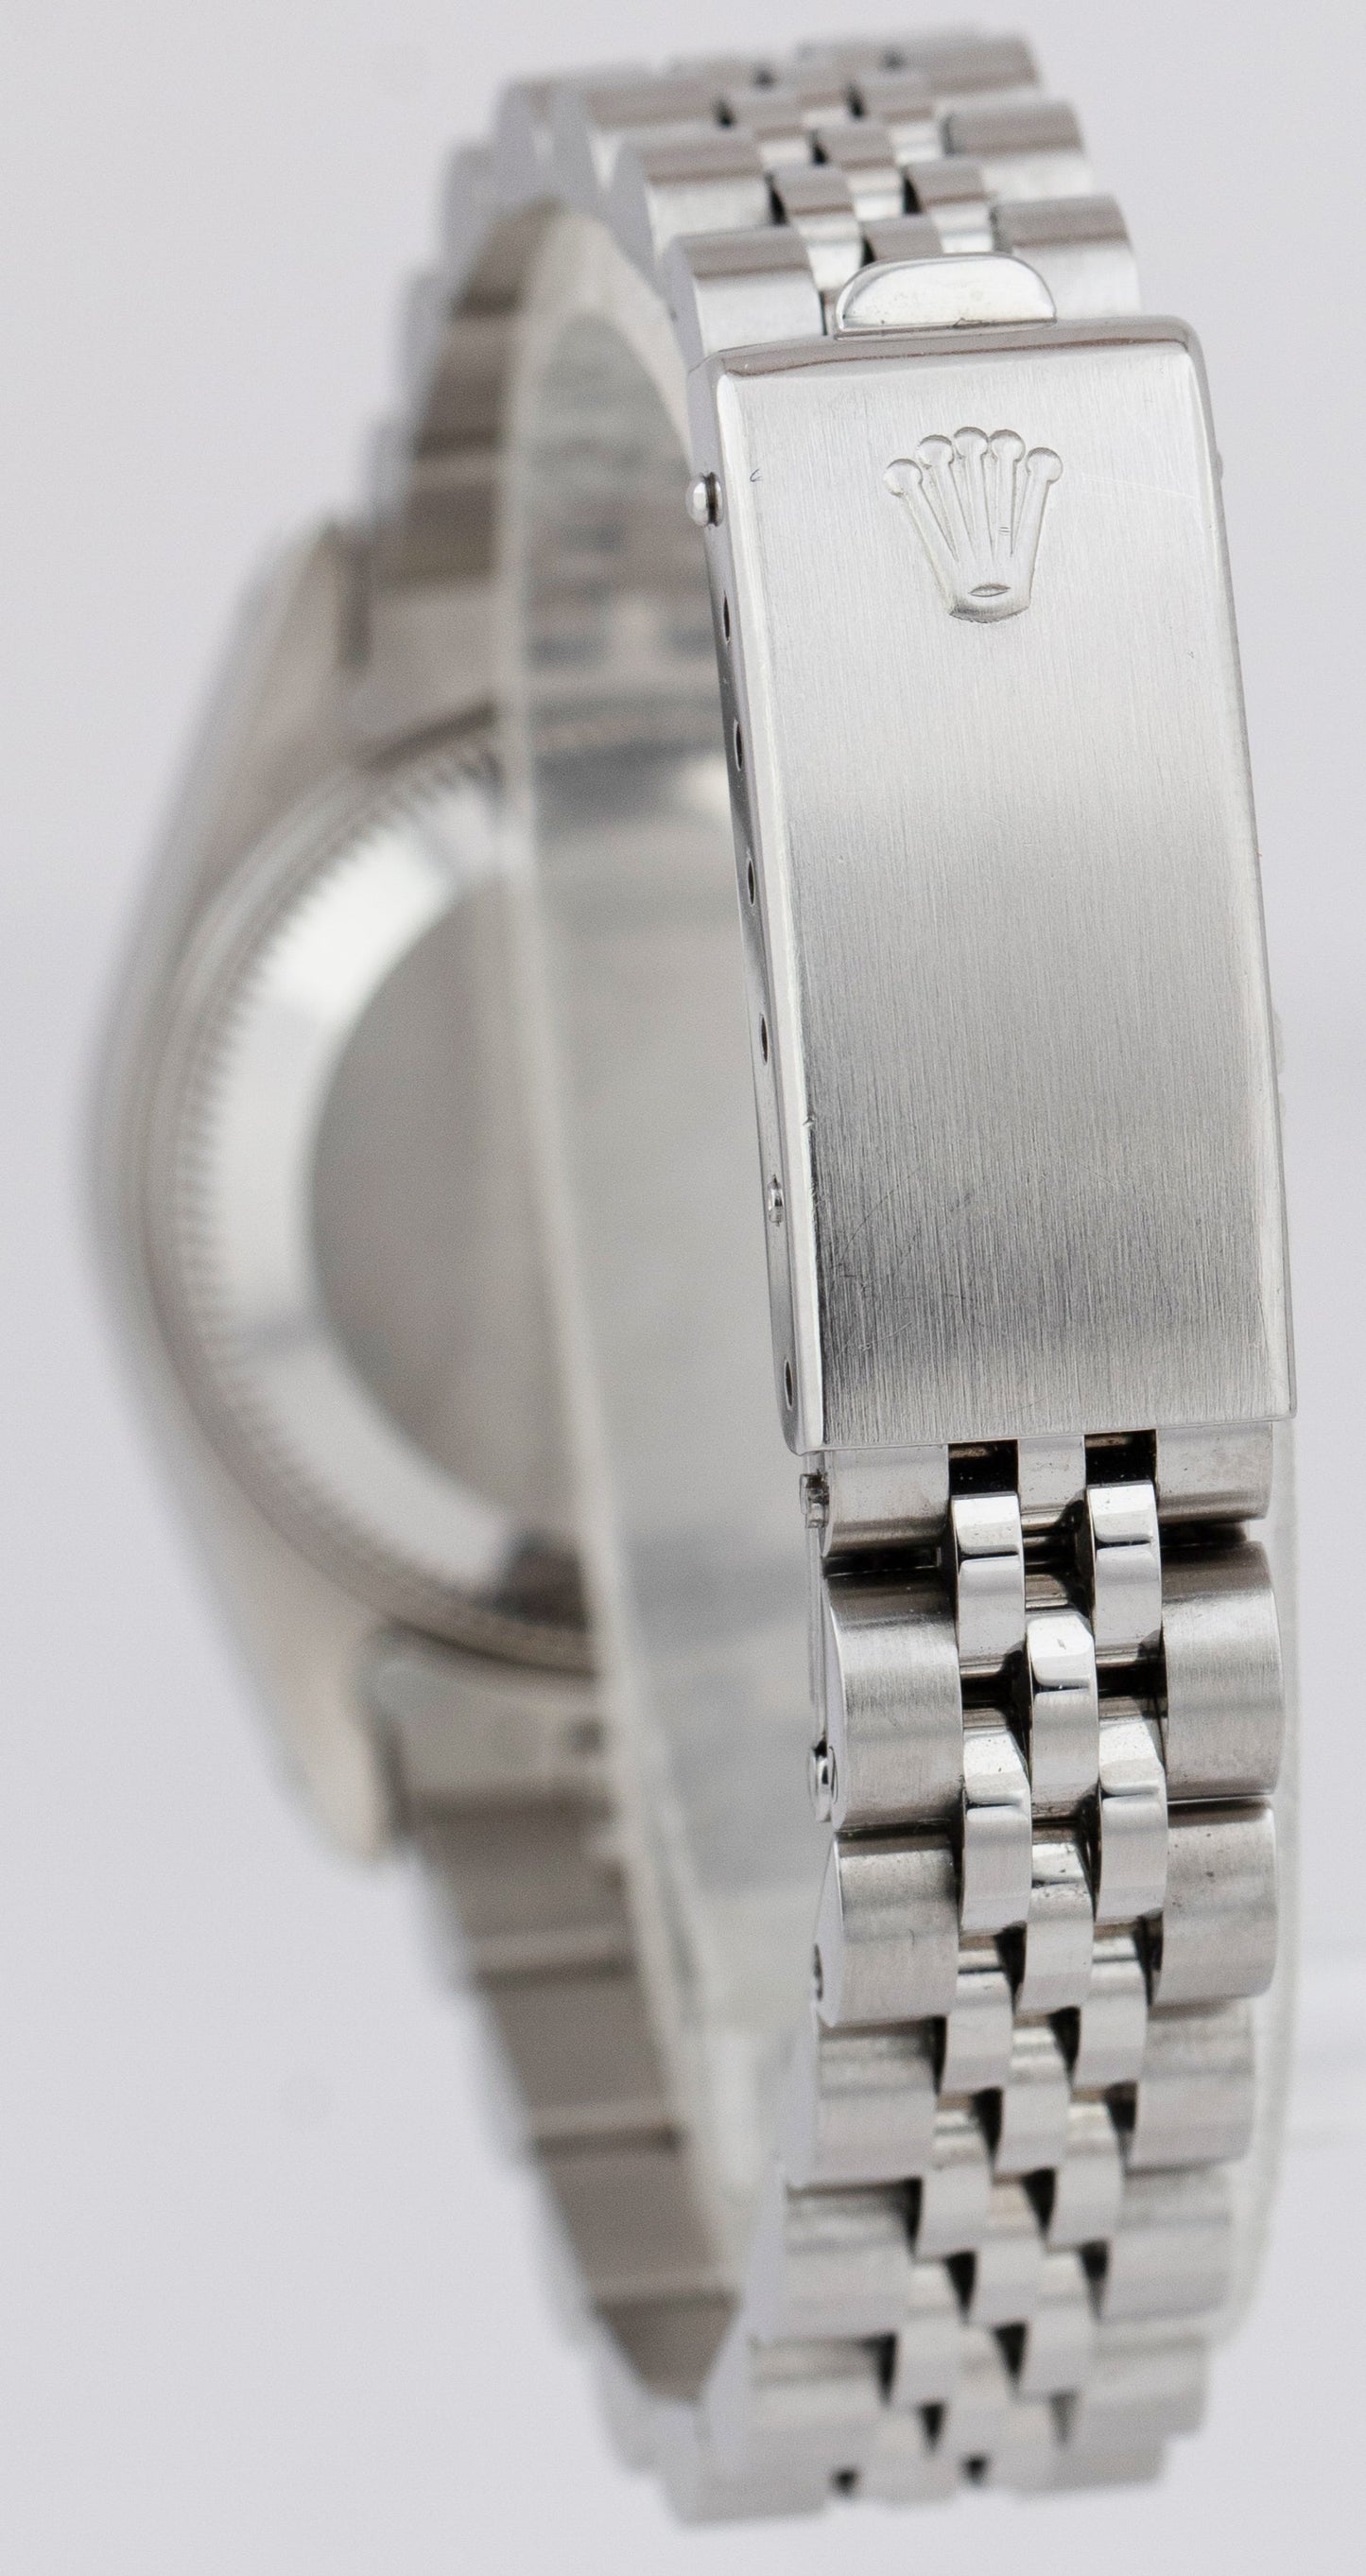 Ladies Rolex DateJust 26mm Silver Stainless Engine Turned Jubilee Watch 69240